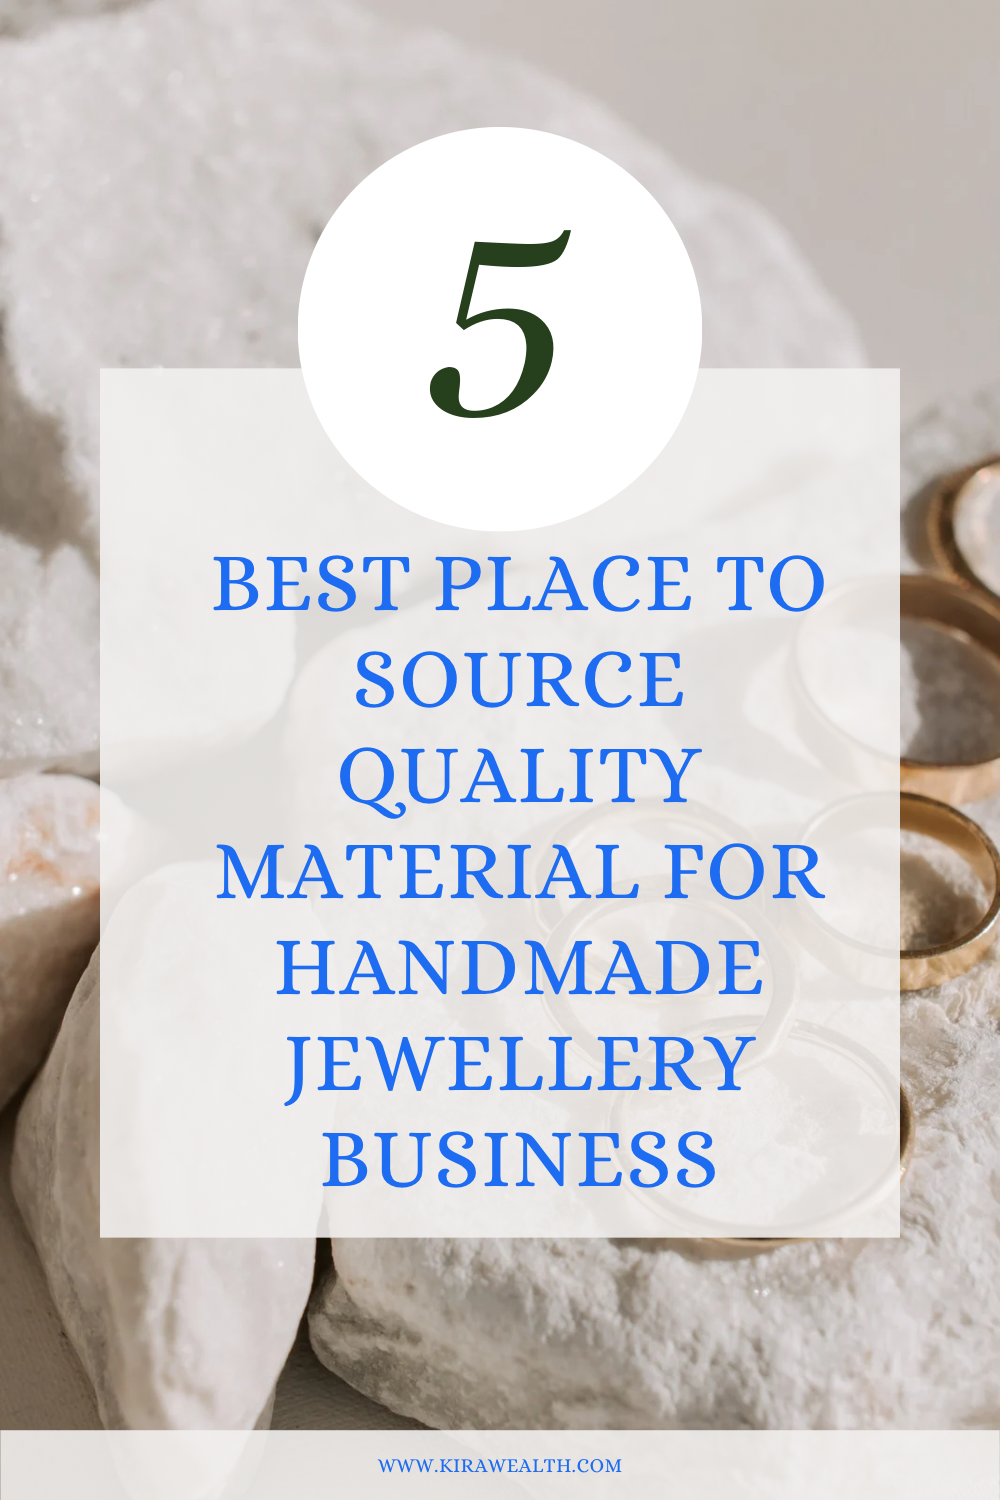 5 best places to source quality material for handmade jewellery business